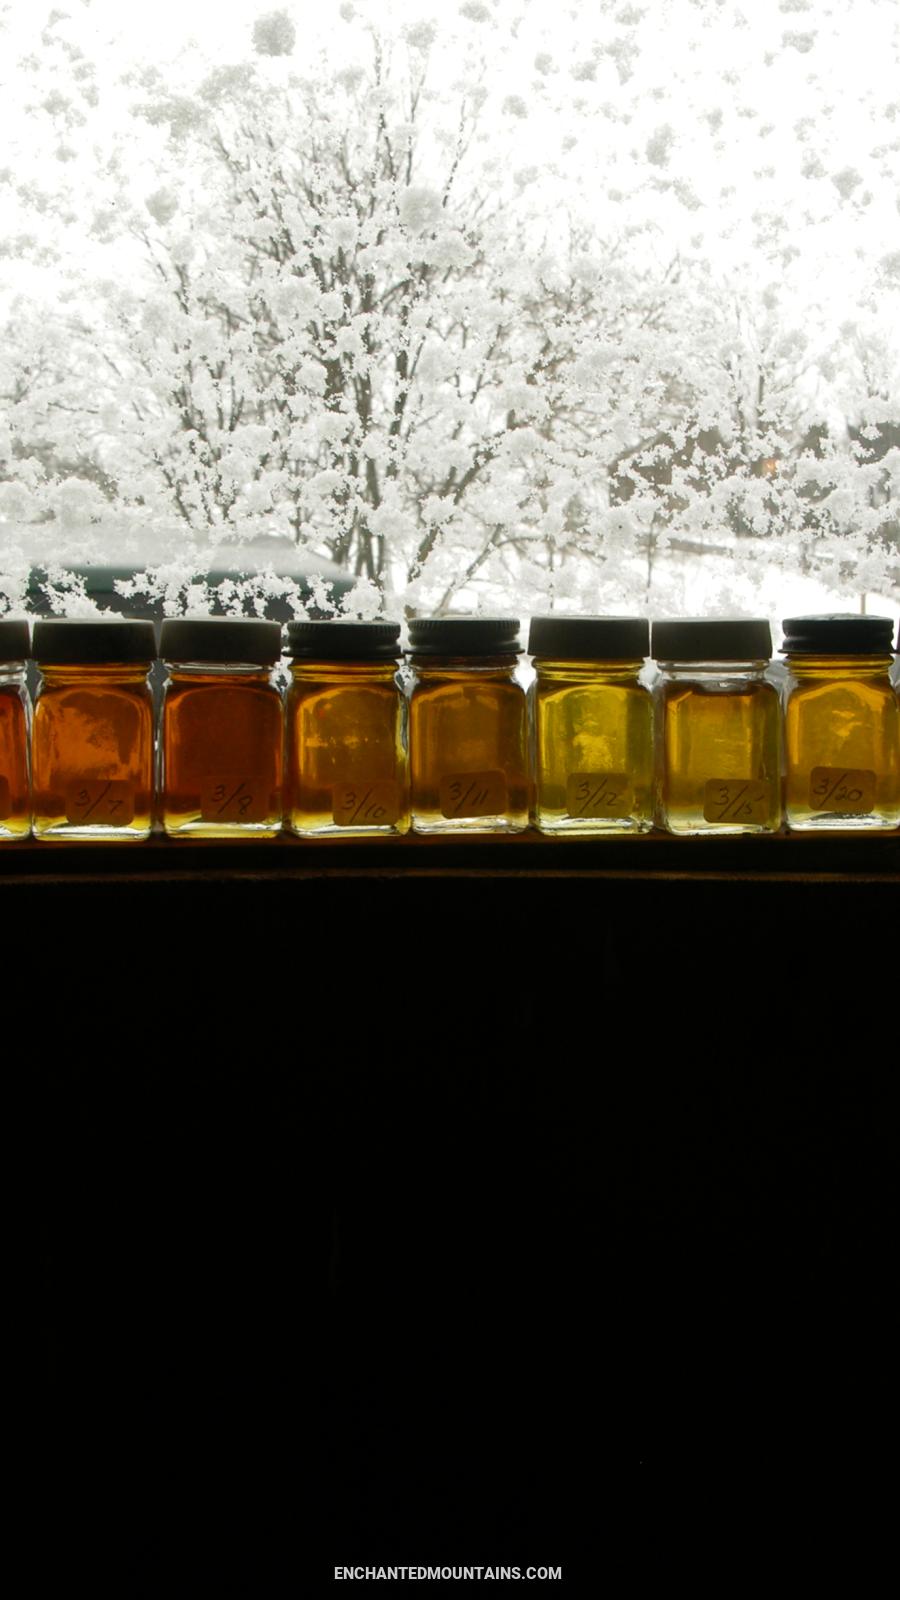 Jars of maple syrup in the window show the colors of maple syrup. Taken at Moore's Sugar Shack and Pancake House